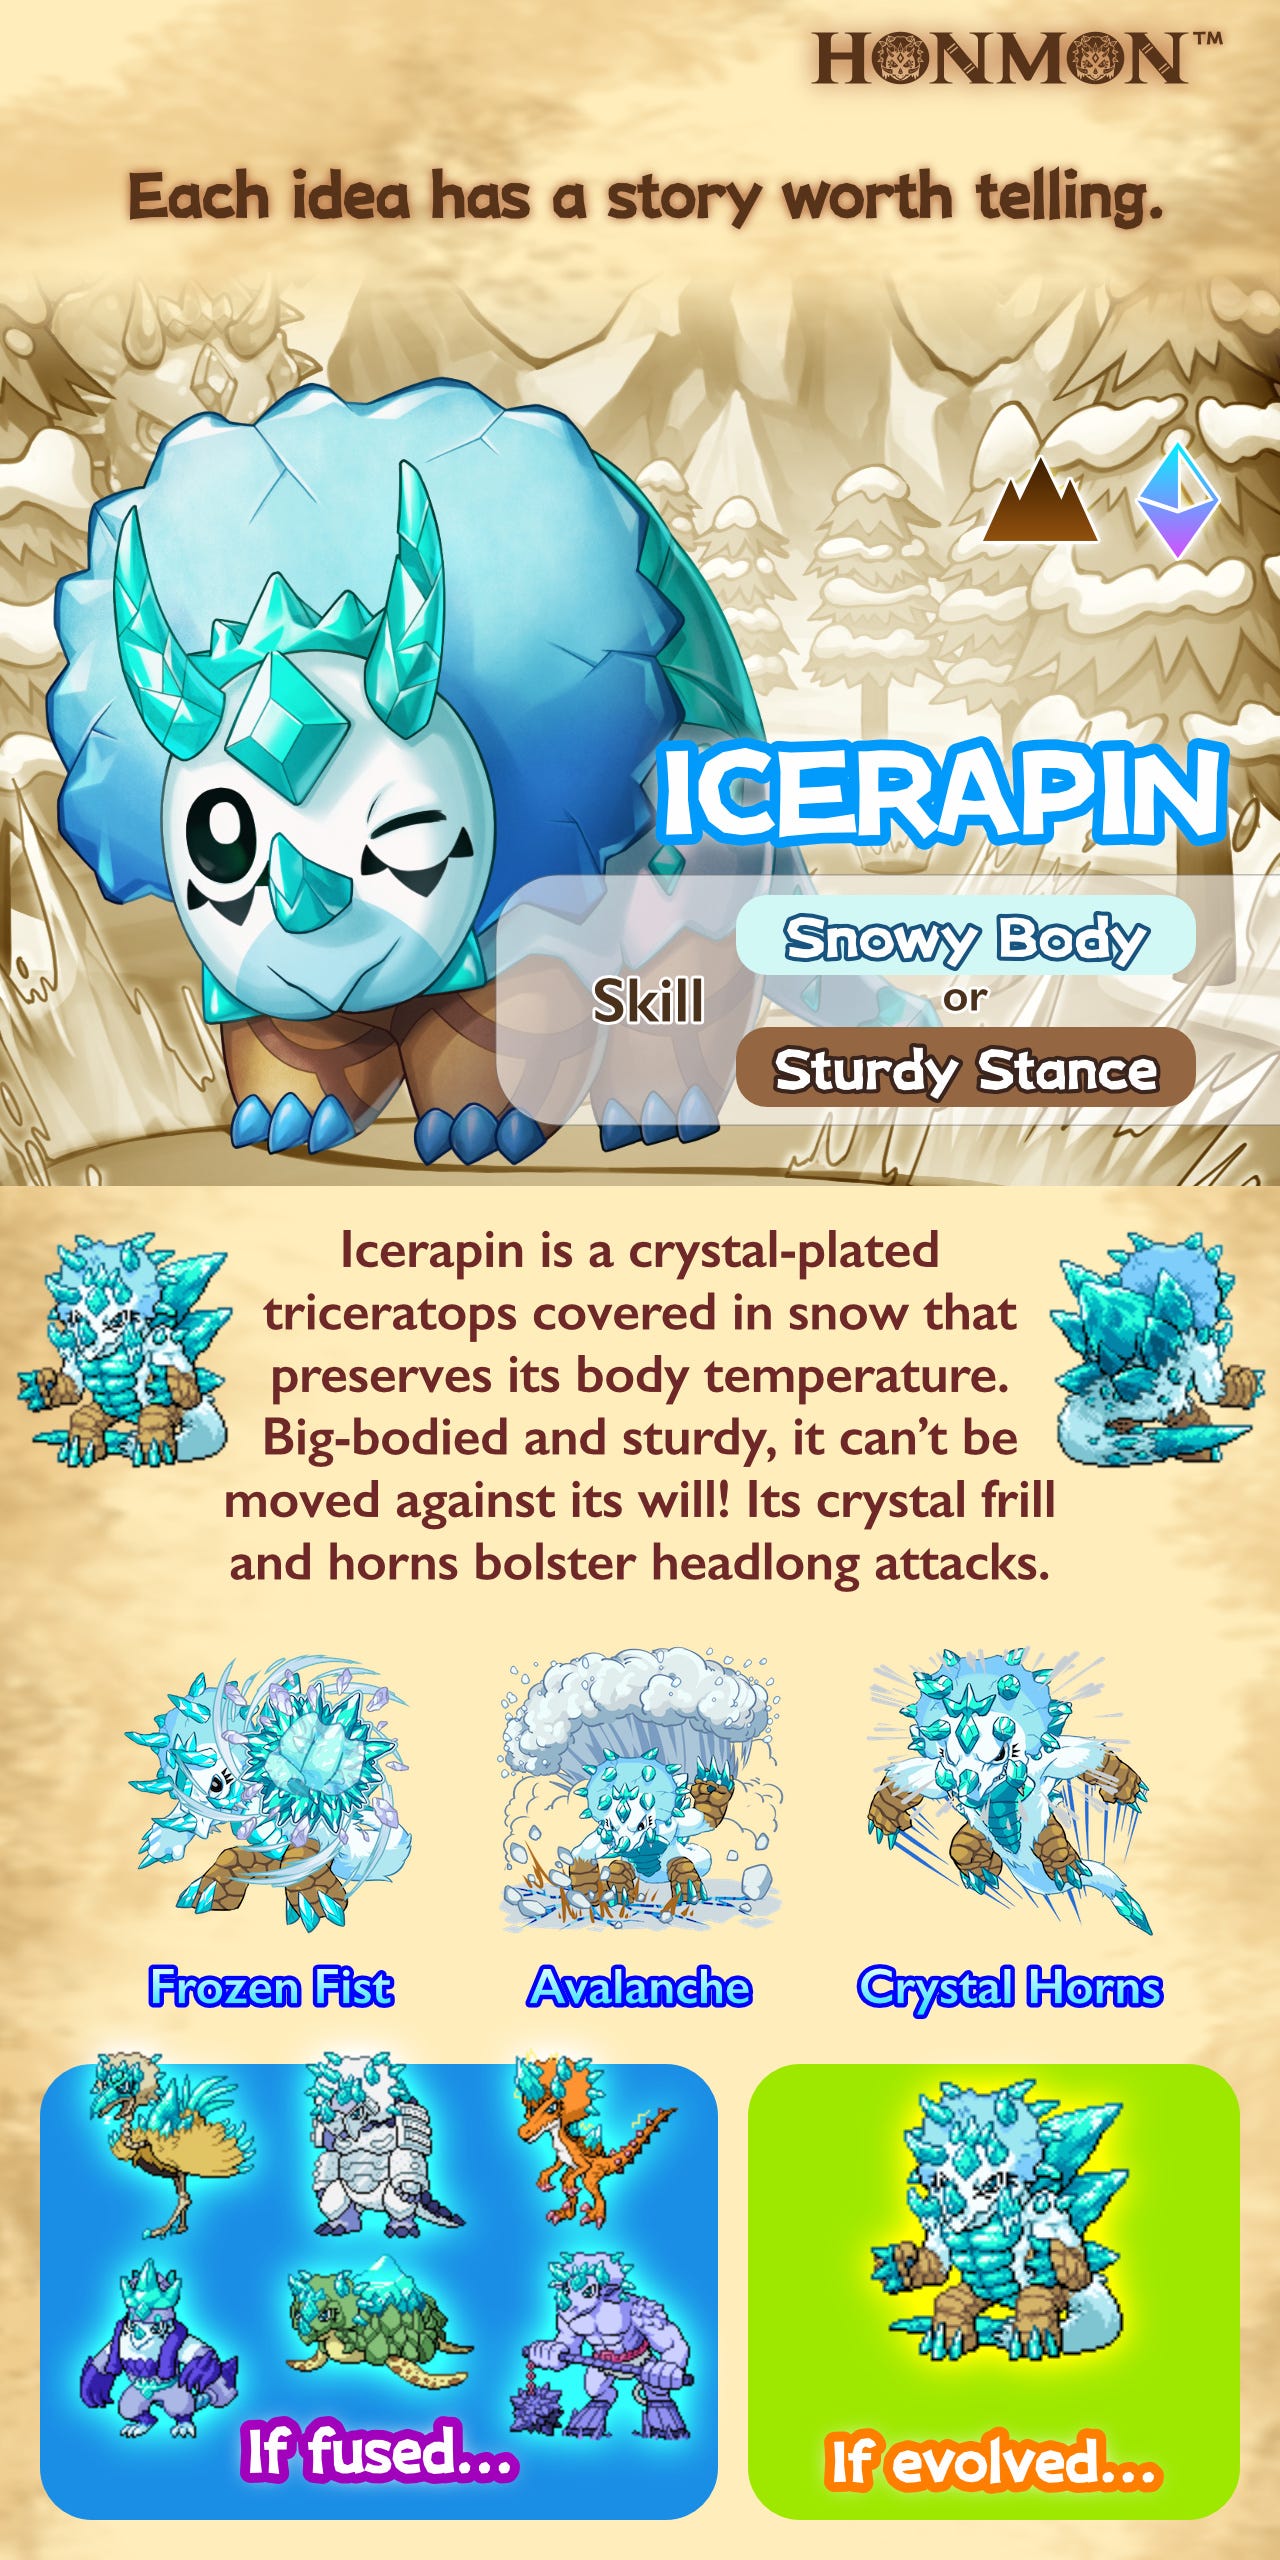 Icerapin evolves into a crystal-plated triceratops covered in snow that preserves its body temperature. Big-bodied and sturdy, it can’t be moved against its will! Its crystal frill and horns bolster headlong attacks. Moves inheritable through fusion include Rockhead Ram, Icequake, Gemstone Tail, Icequake, and Snow Shards. Skills Snow Body, Sturdy Stance, and Rock Frill remain intact!